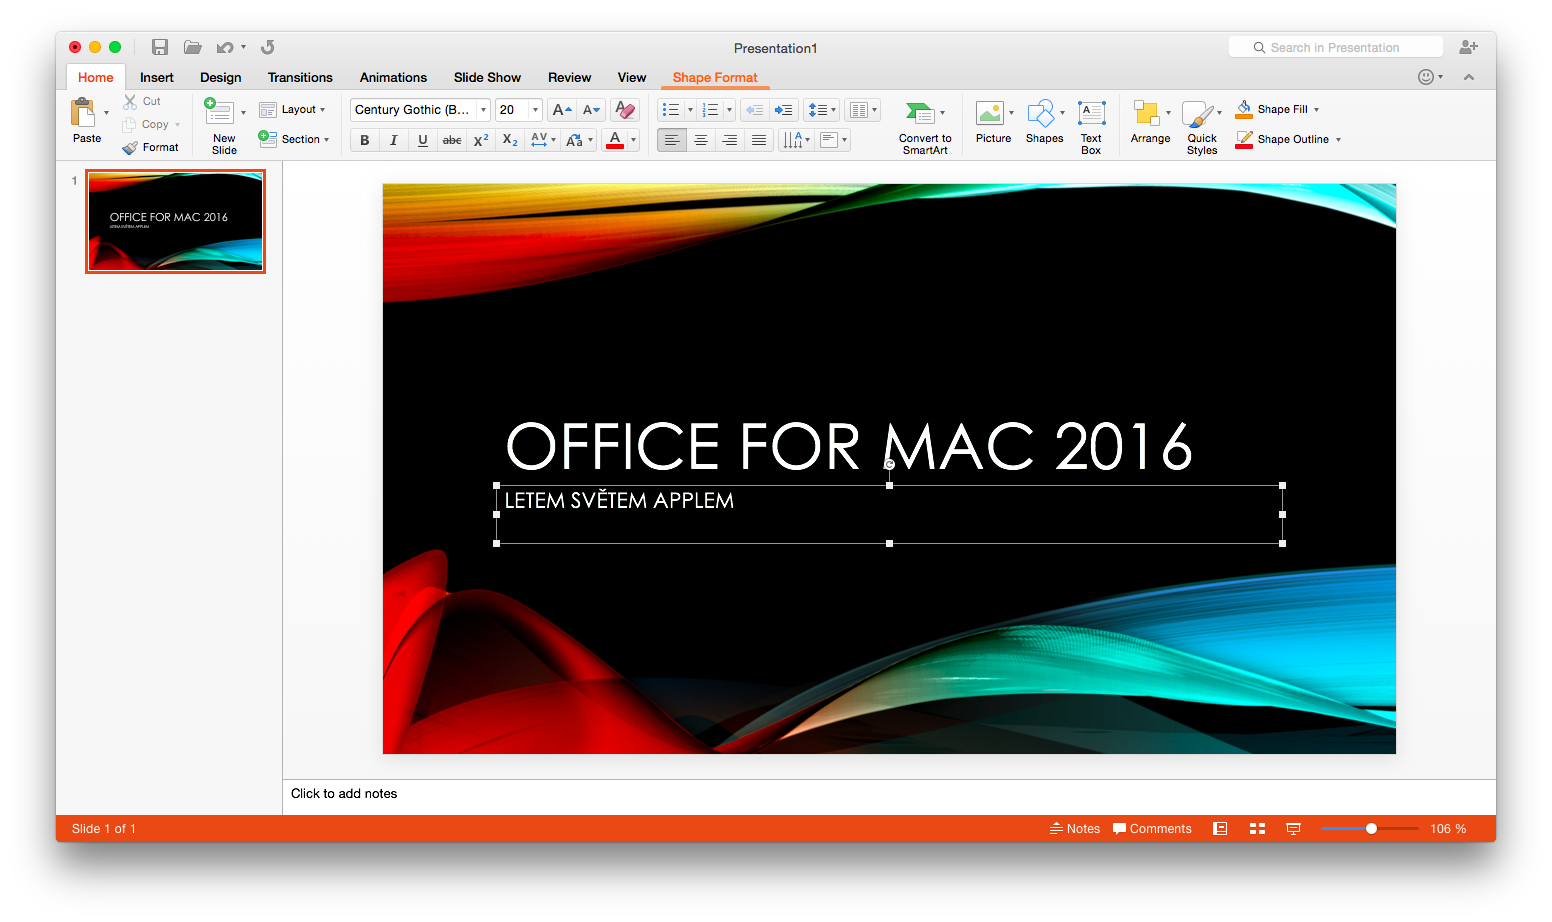 Microsoft powerpoint free download for pc